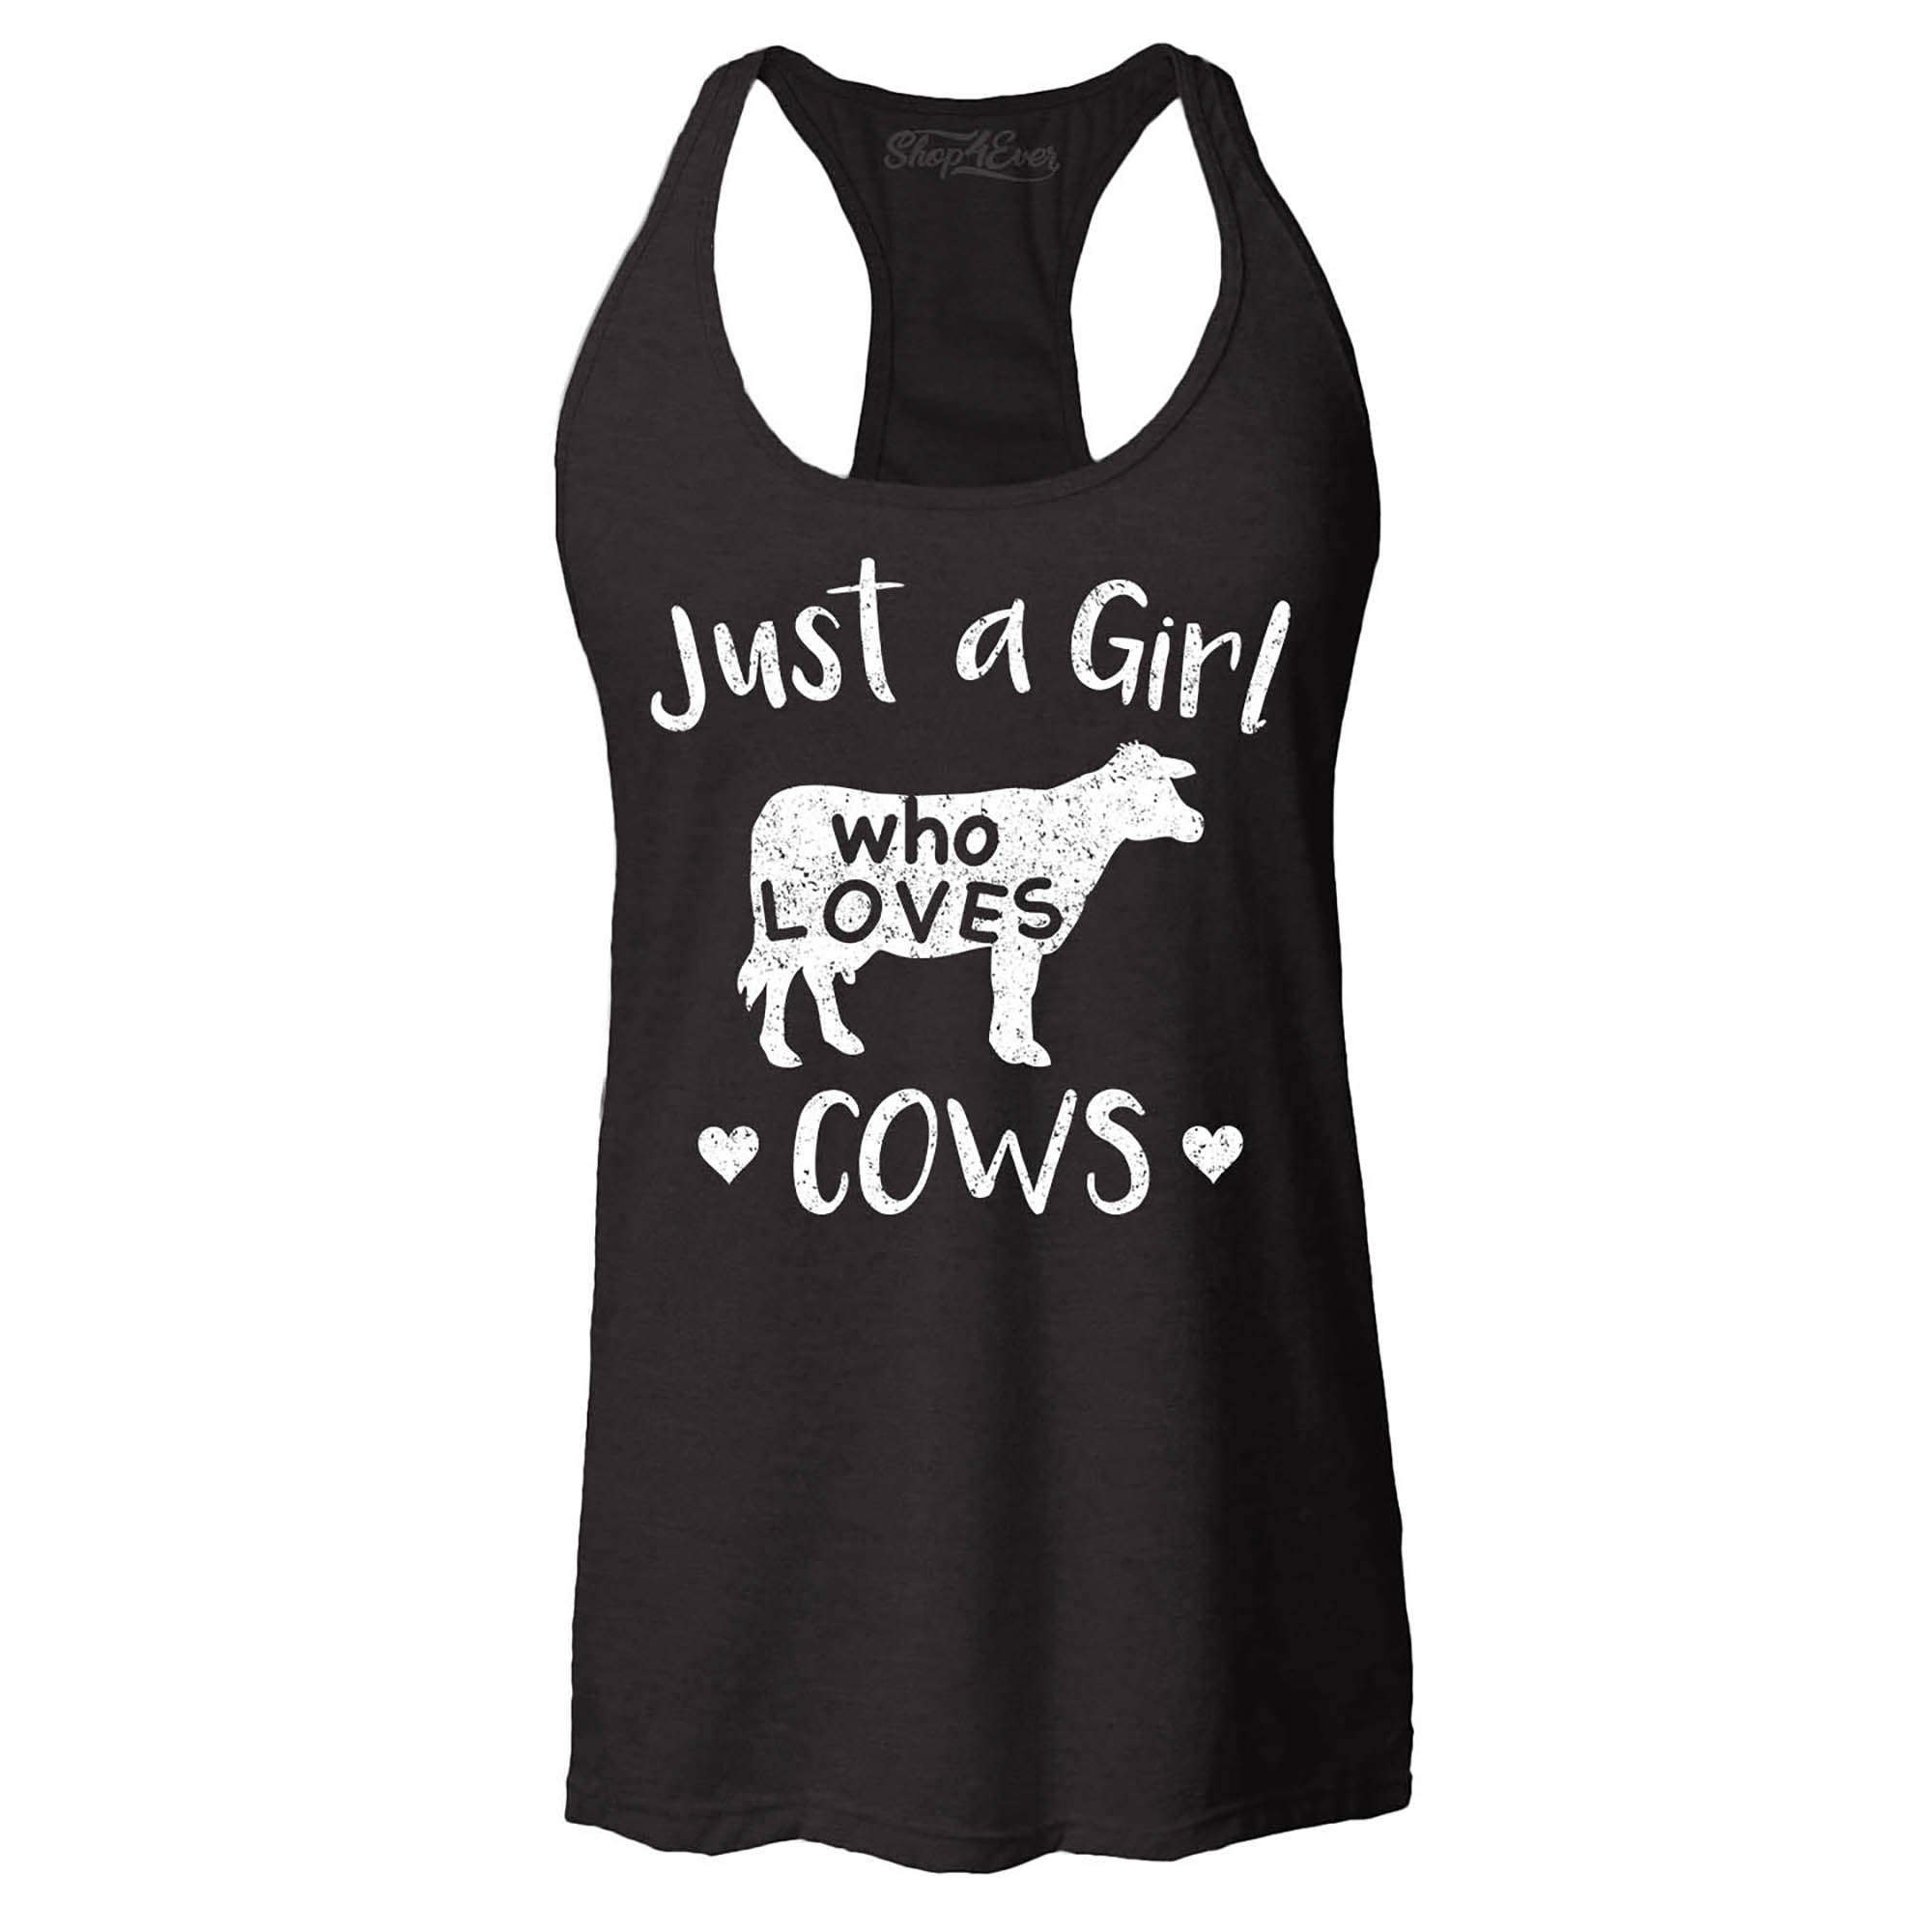 Just A Girl Who Loves Cows Women's Racerback Tank Top Slim Fit